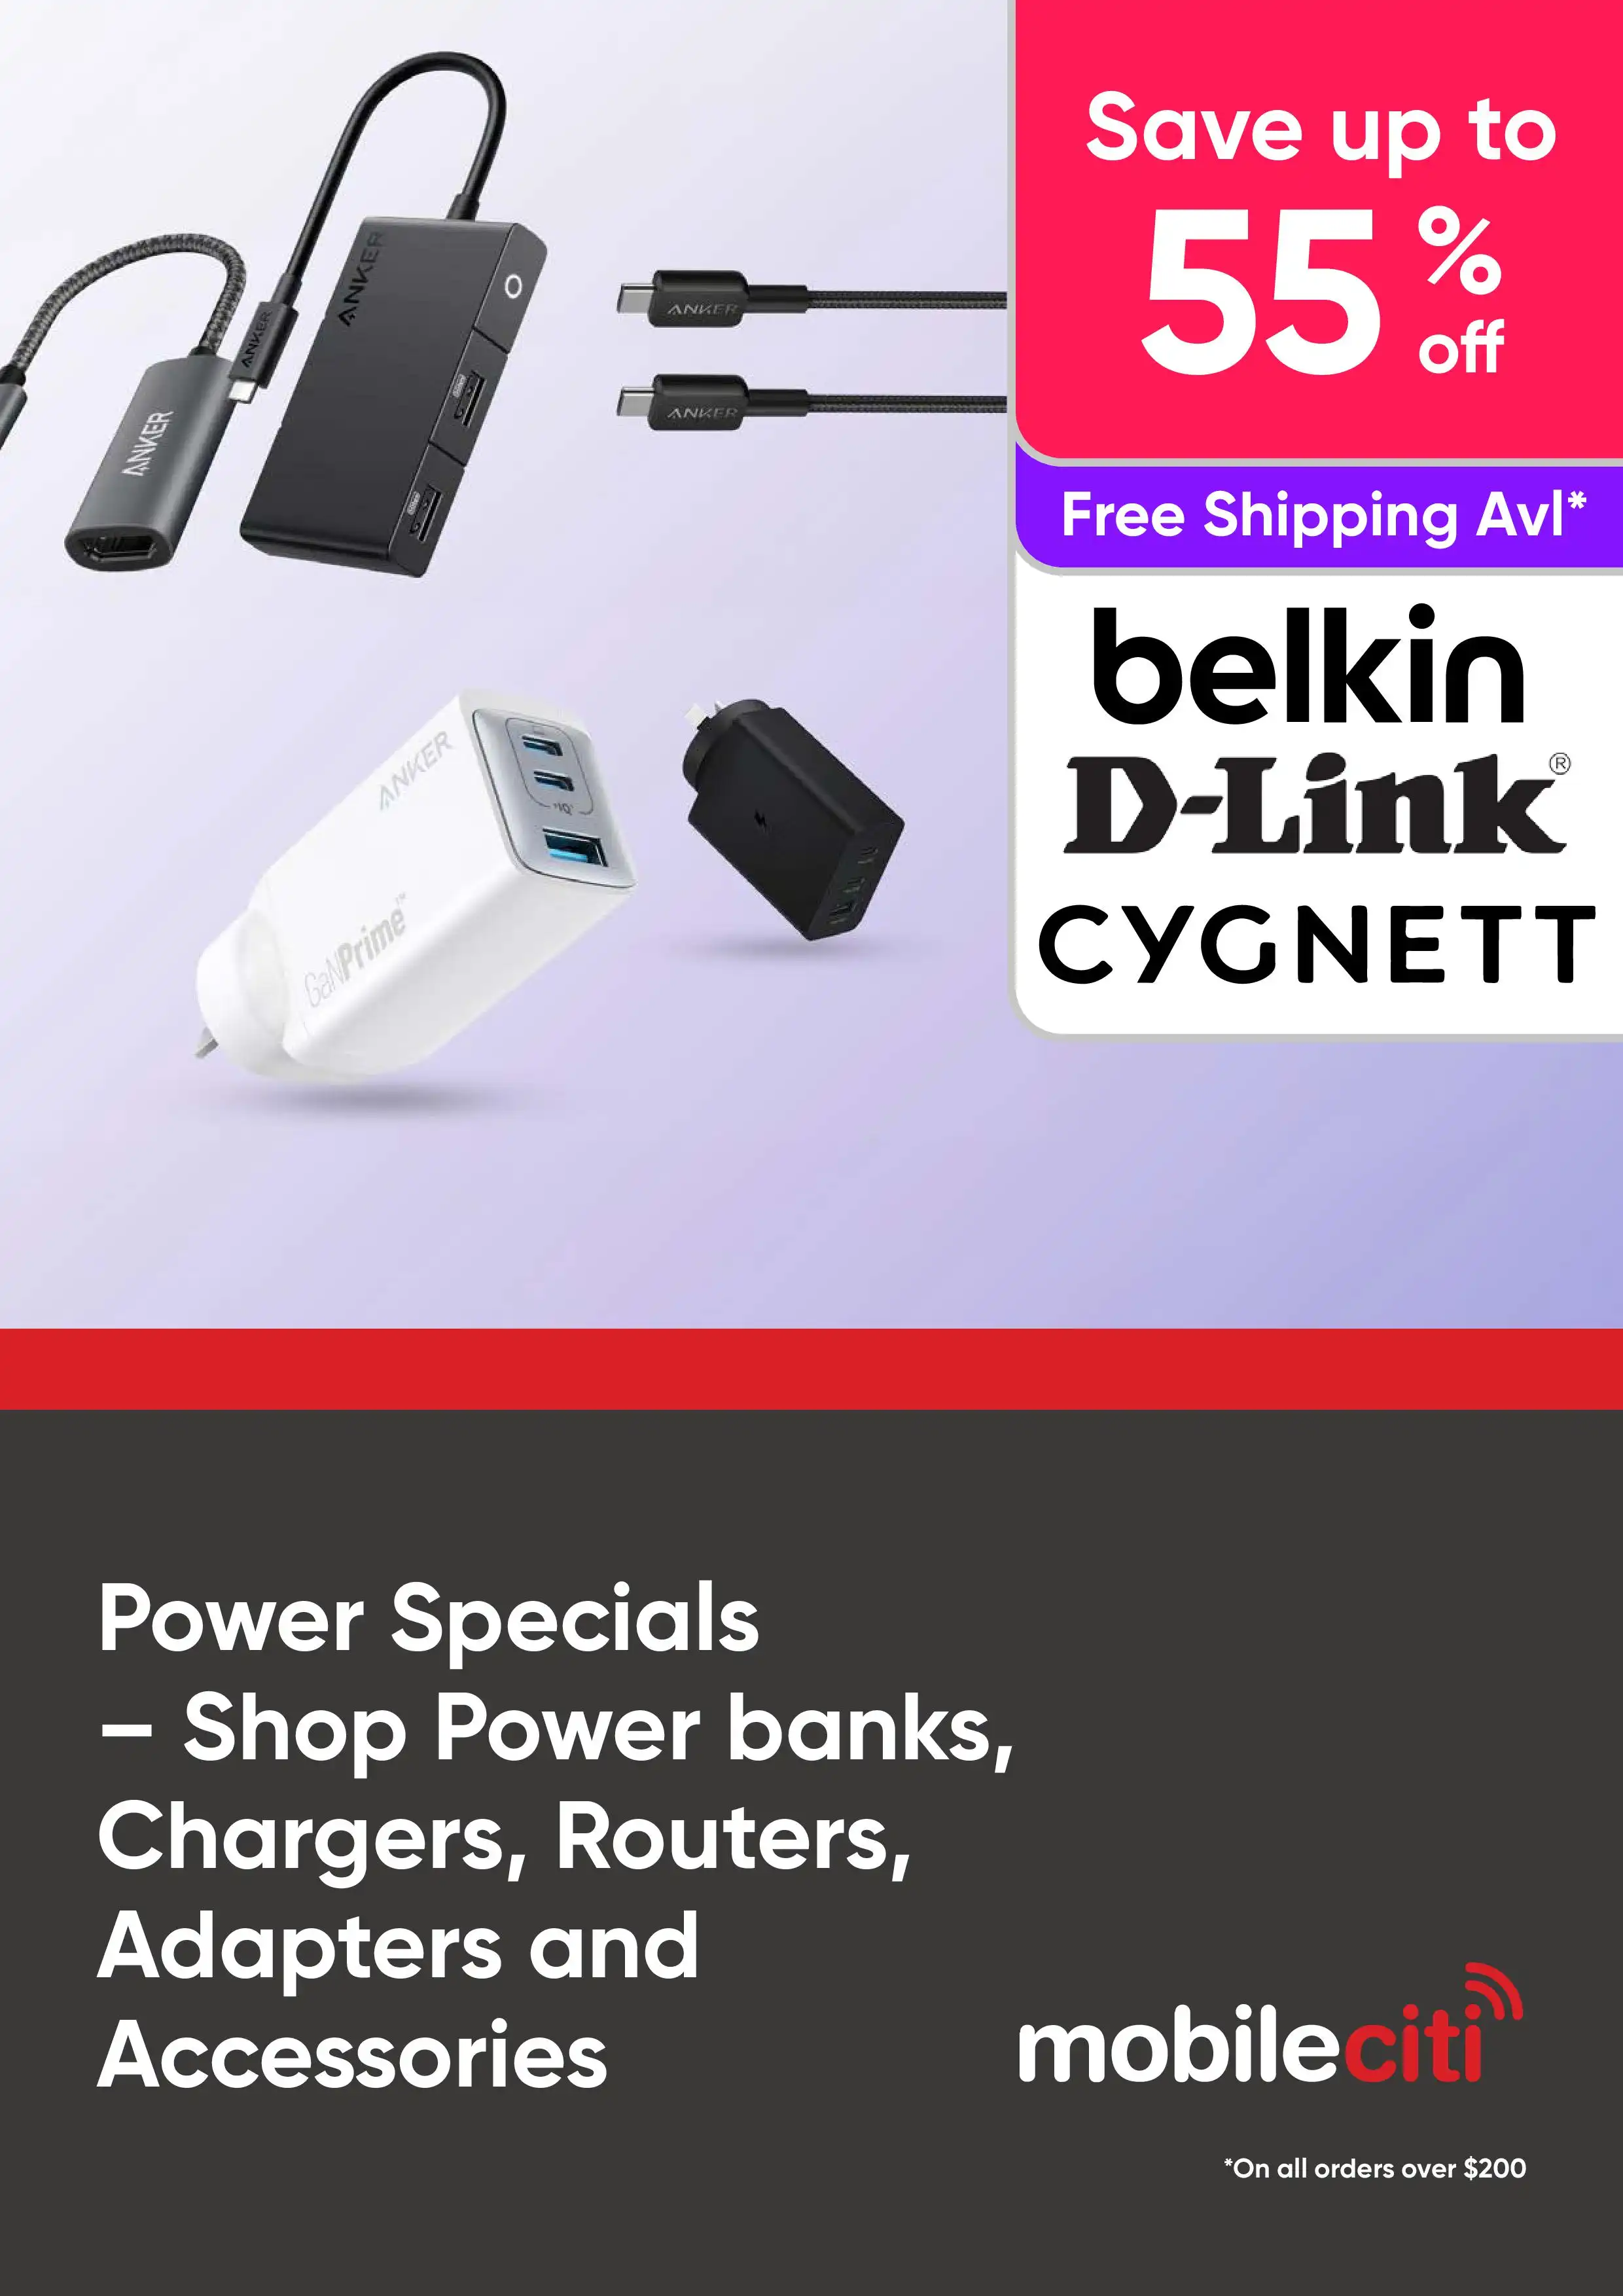 Power Specials - Save Up To 55% Off Power banks, Chargers, Routers, Adapters and Accessories